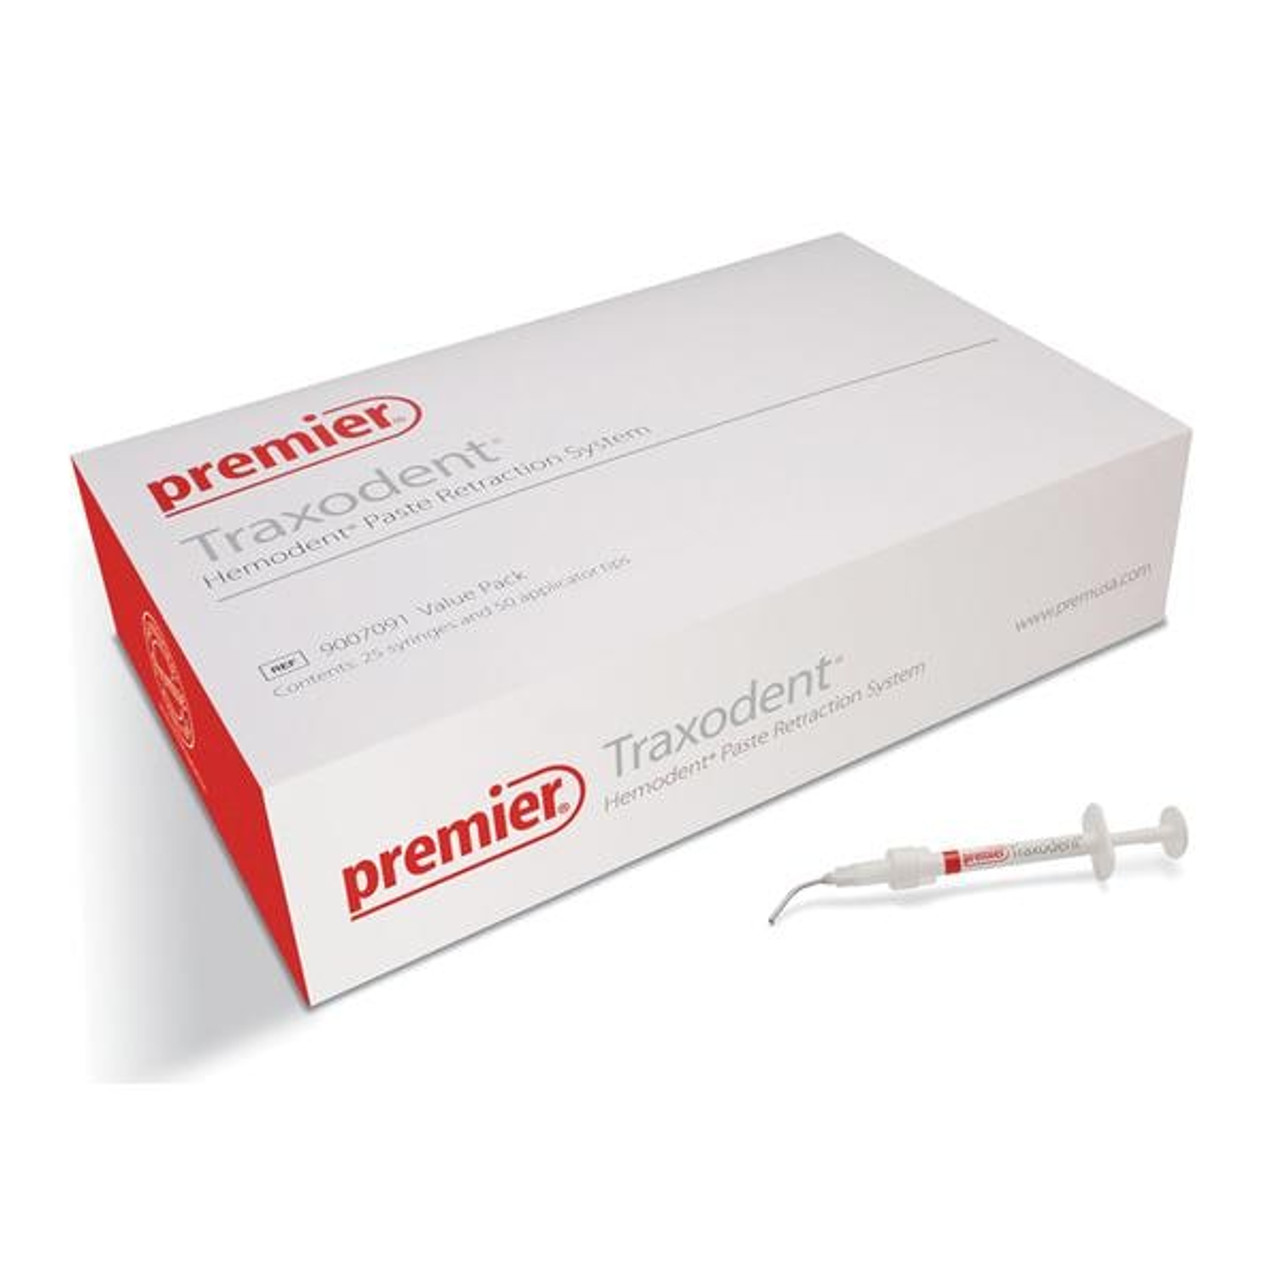 Premier Traxodent Hemodent Paste Retraction System